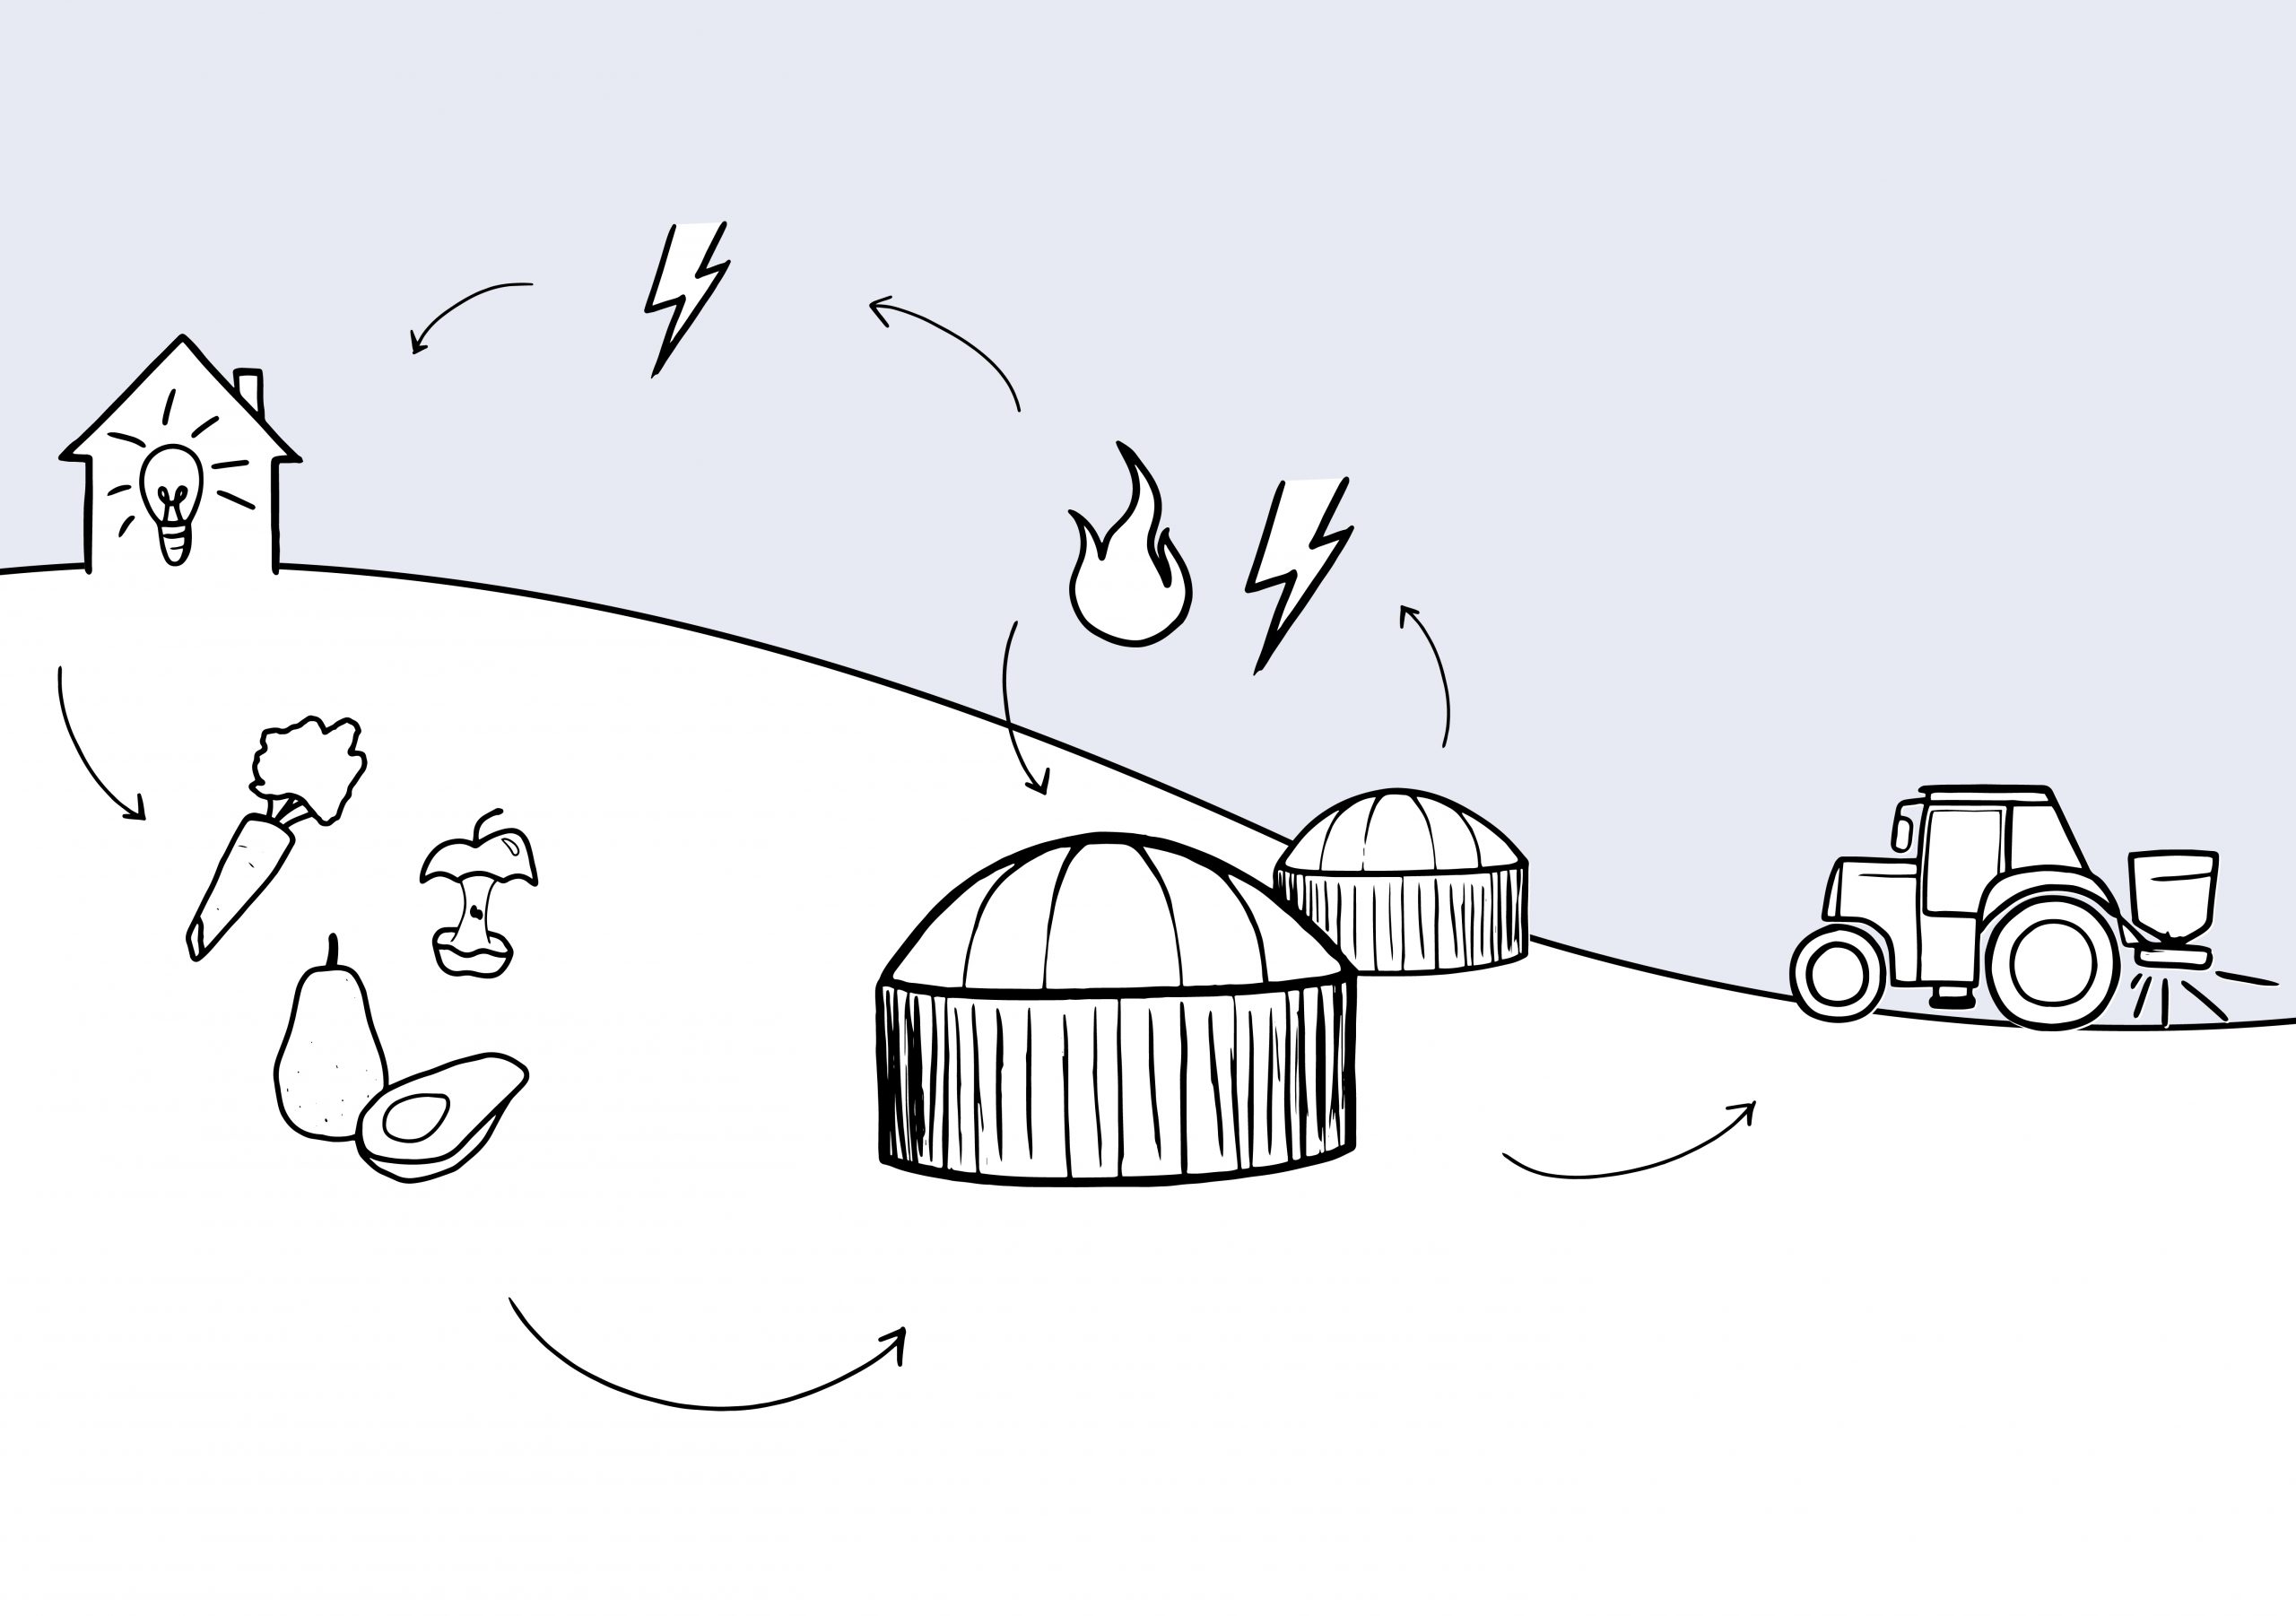 image shows an illustration of the food waste recycling process